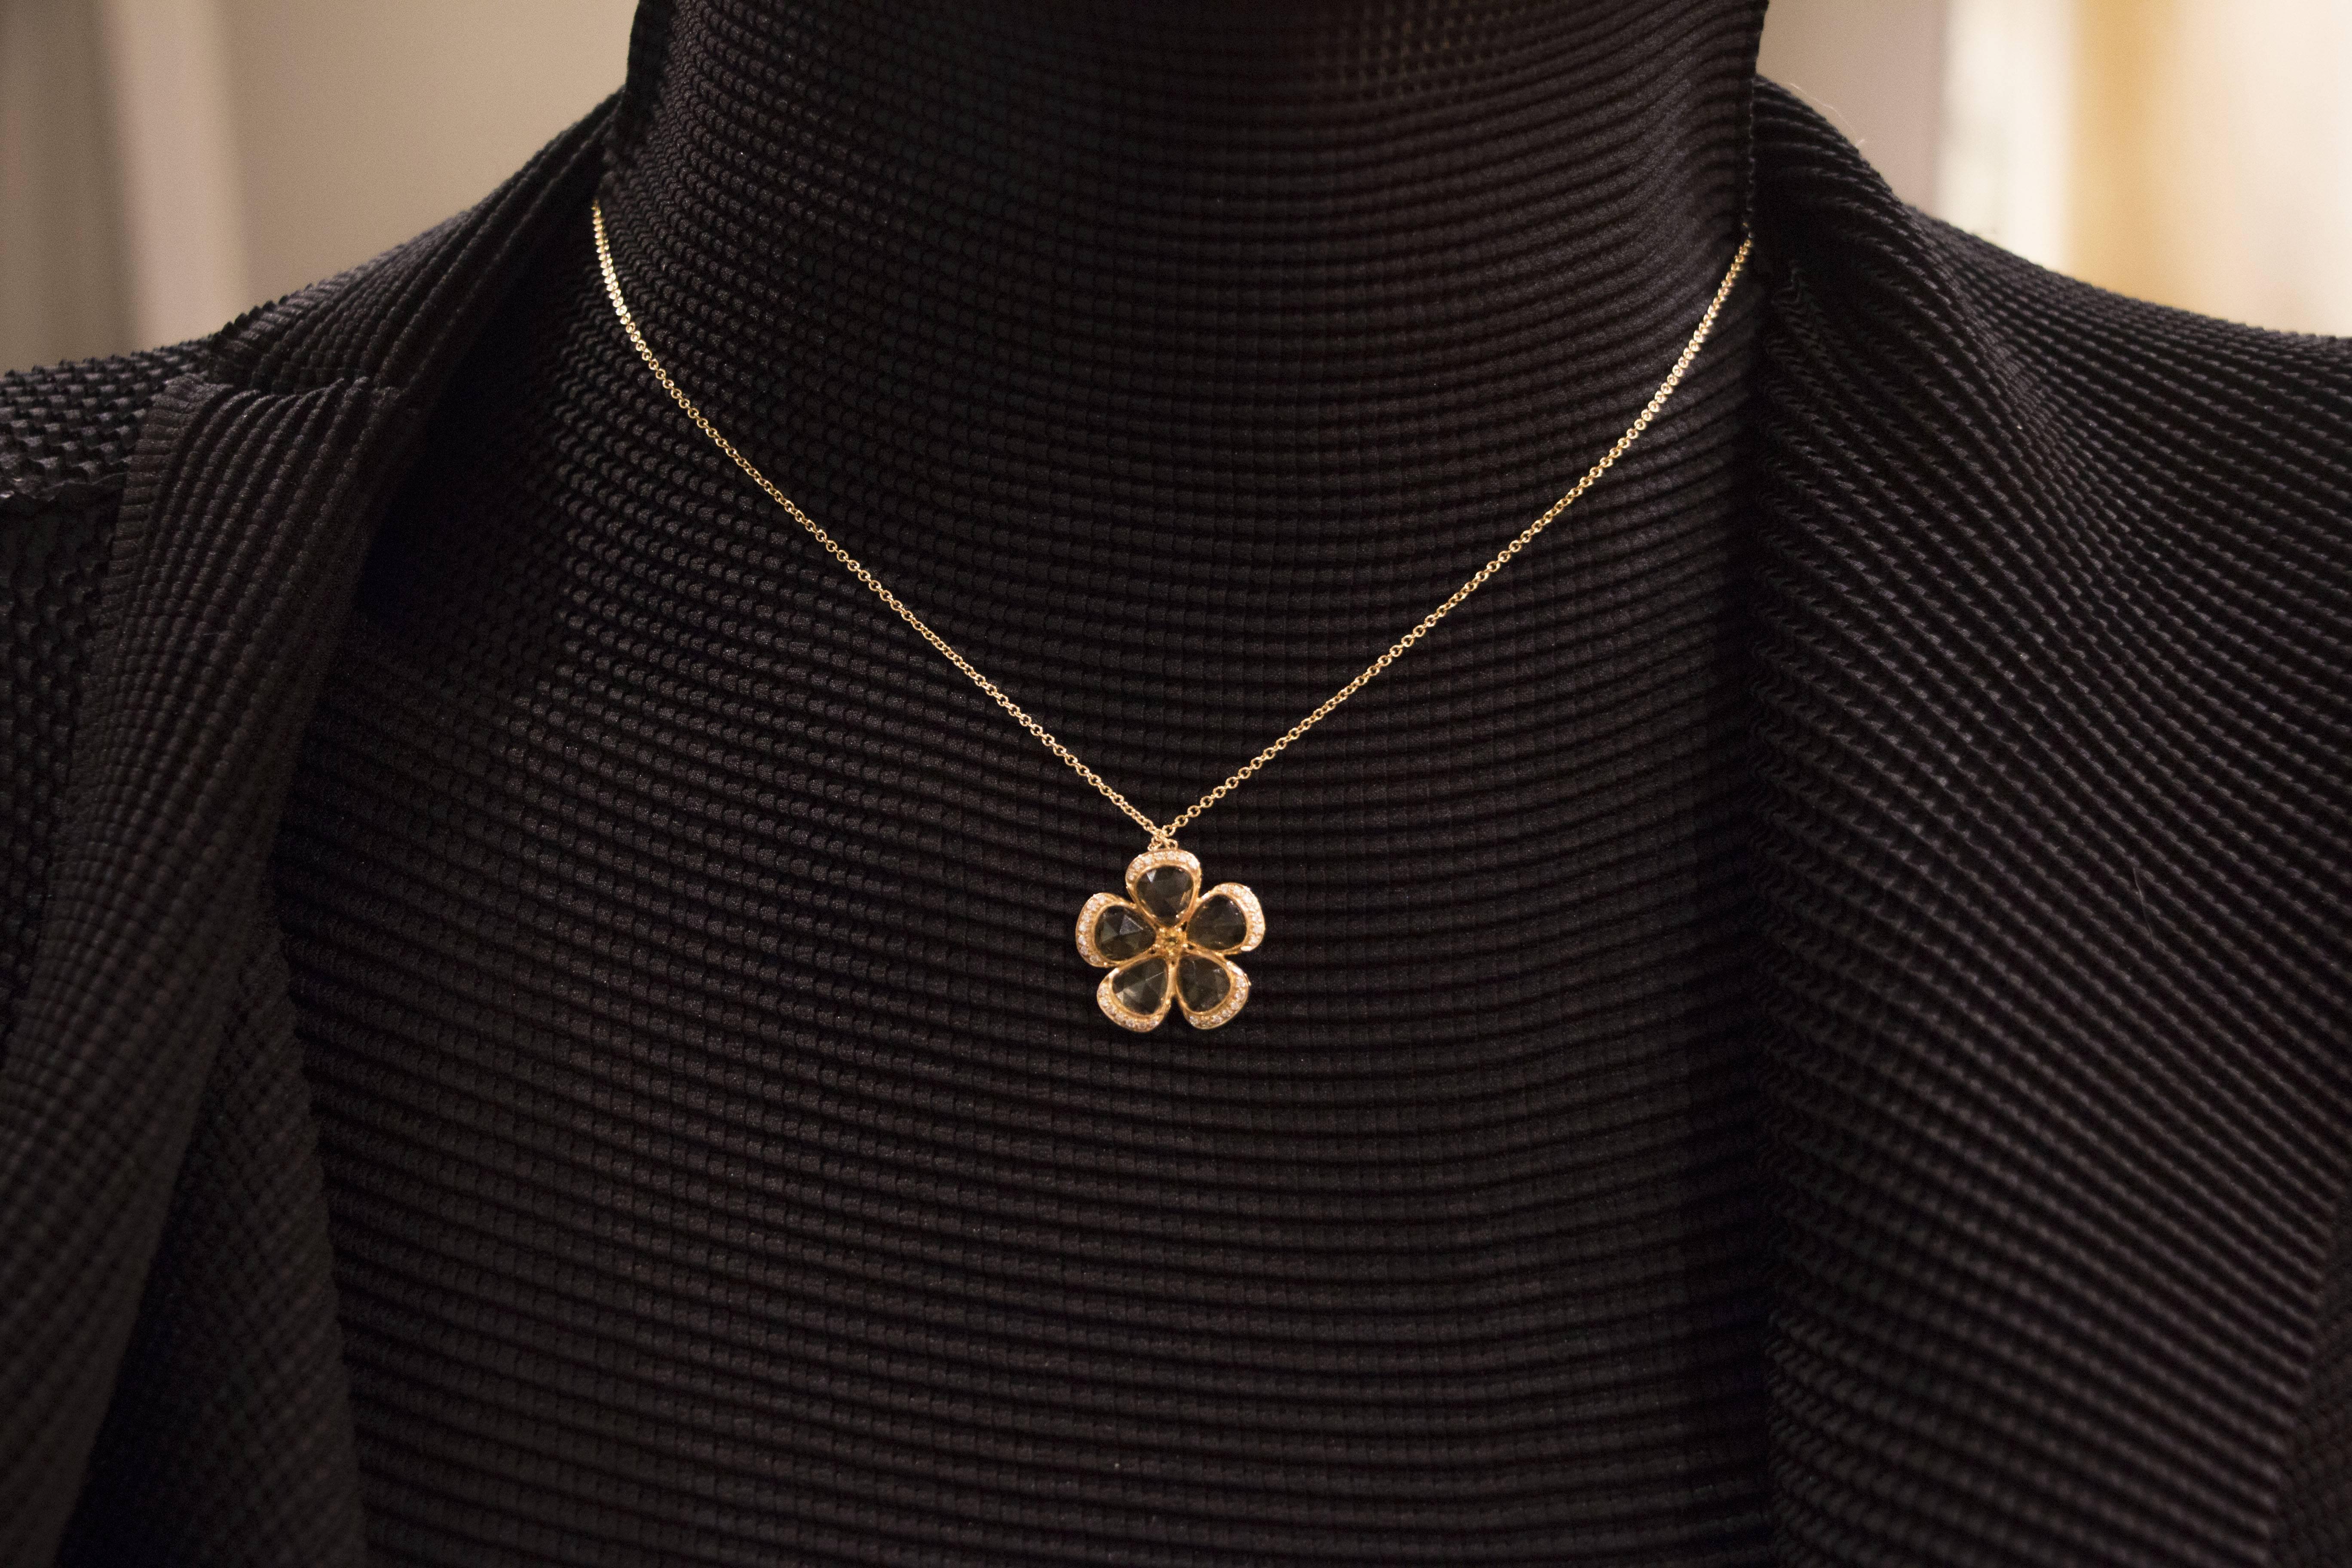 Alex Jona design collection, hand crafted in Italy, 18 karat yellow gold flower pendant set with five citrine quartz petals weighing 3.97 carats in total and white diamonds weighing 0.14 carats, suspended by a 18 karat yellow gold chain 16.5